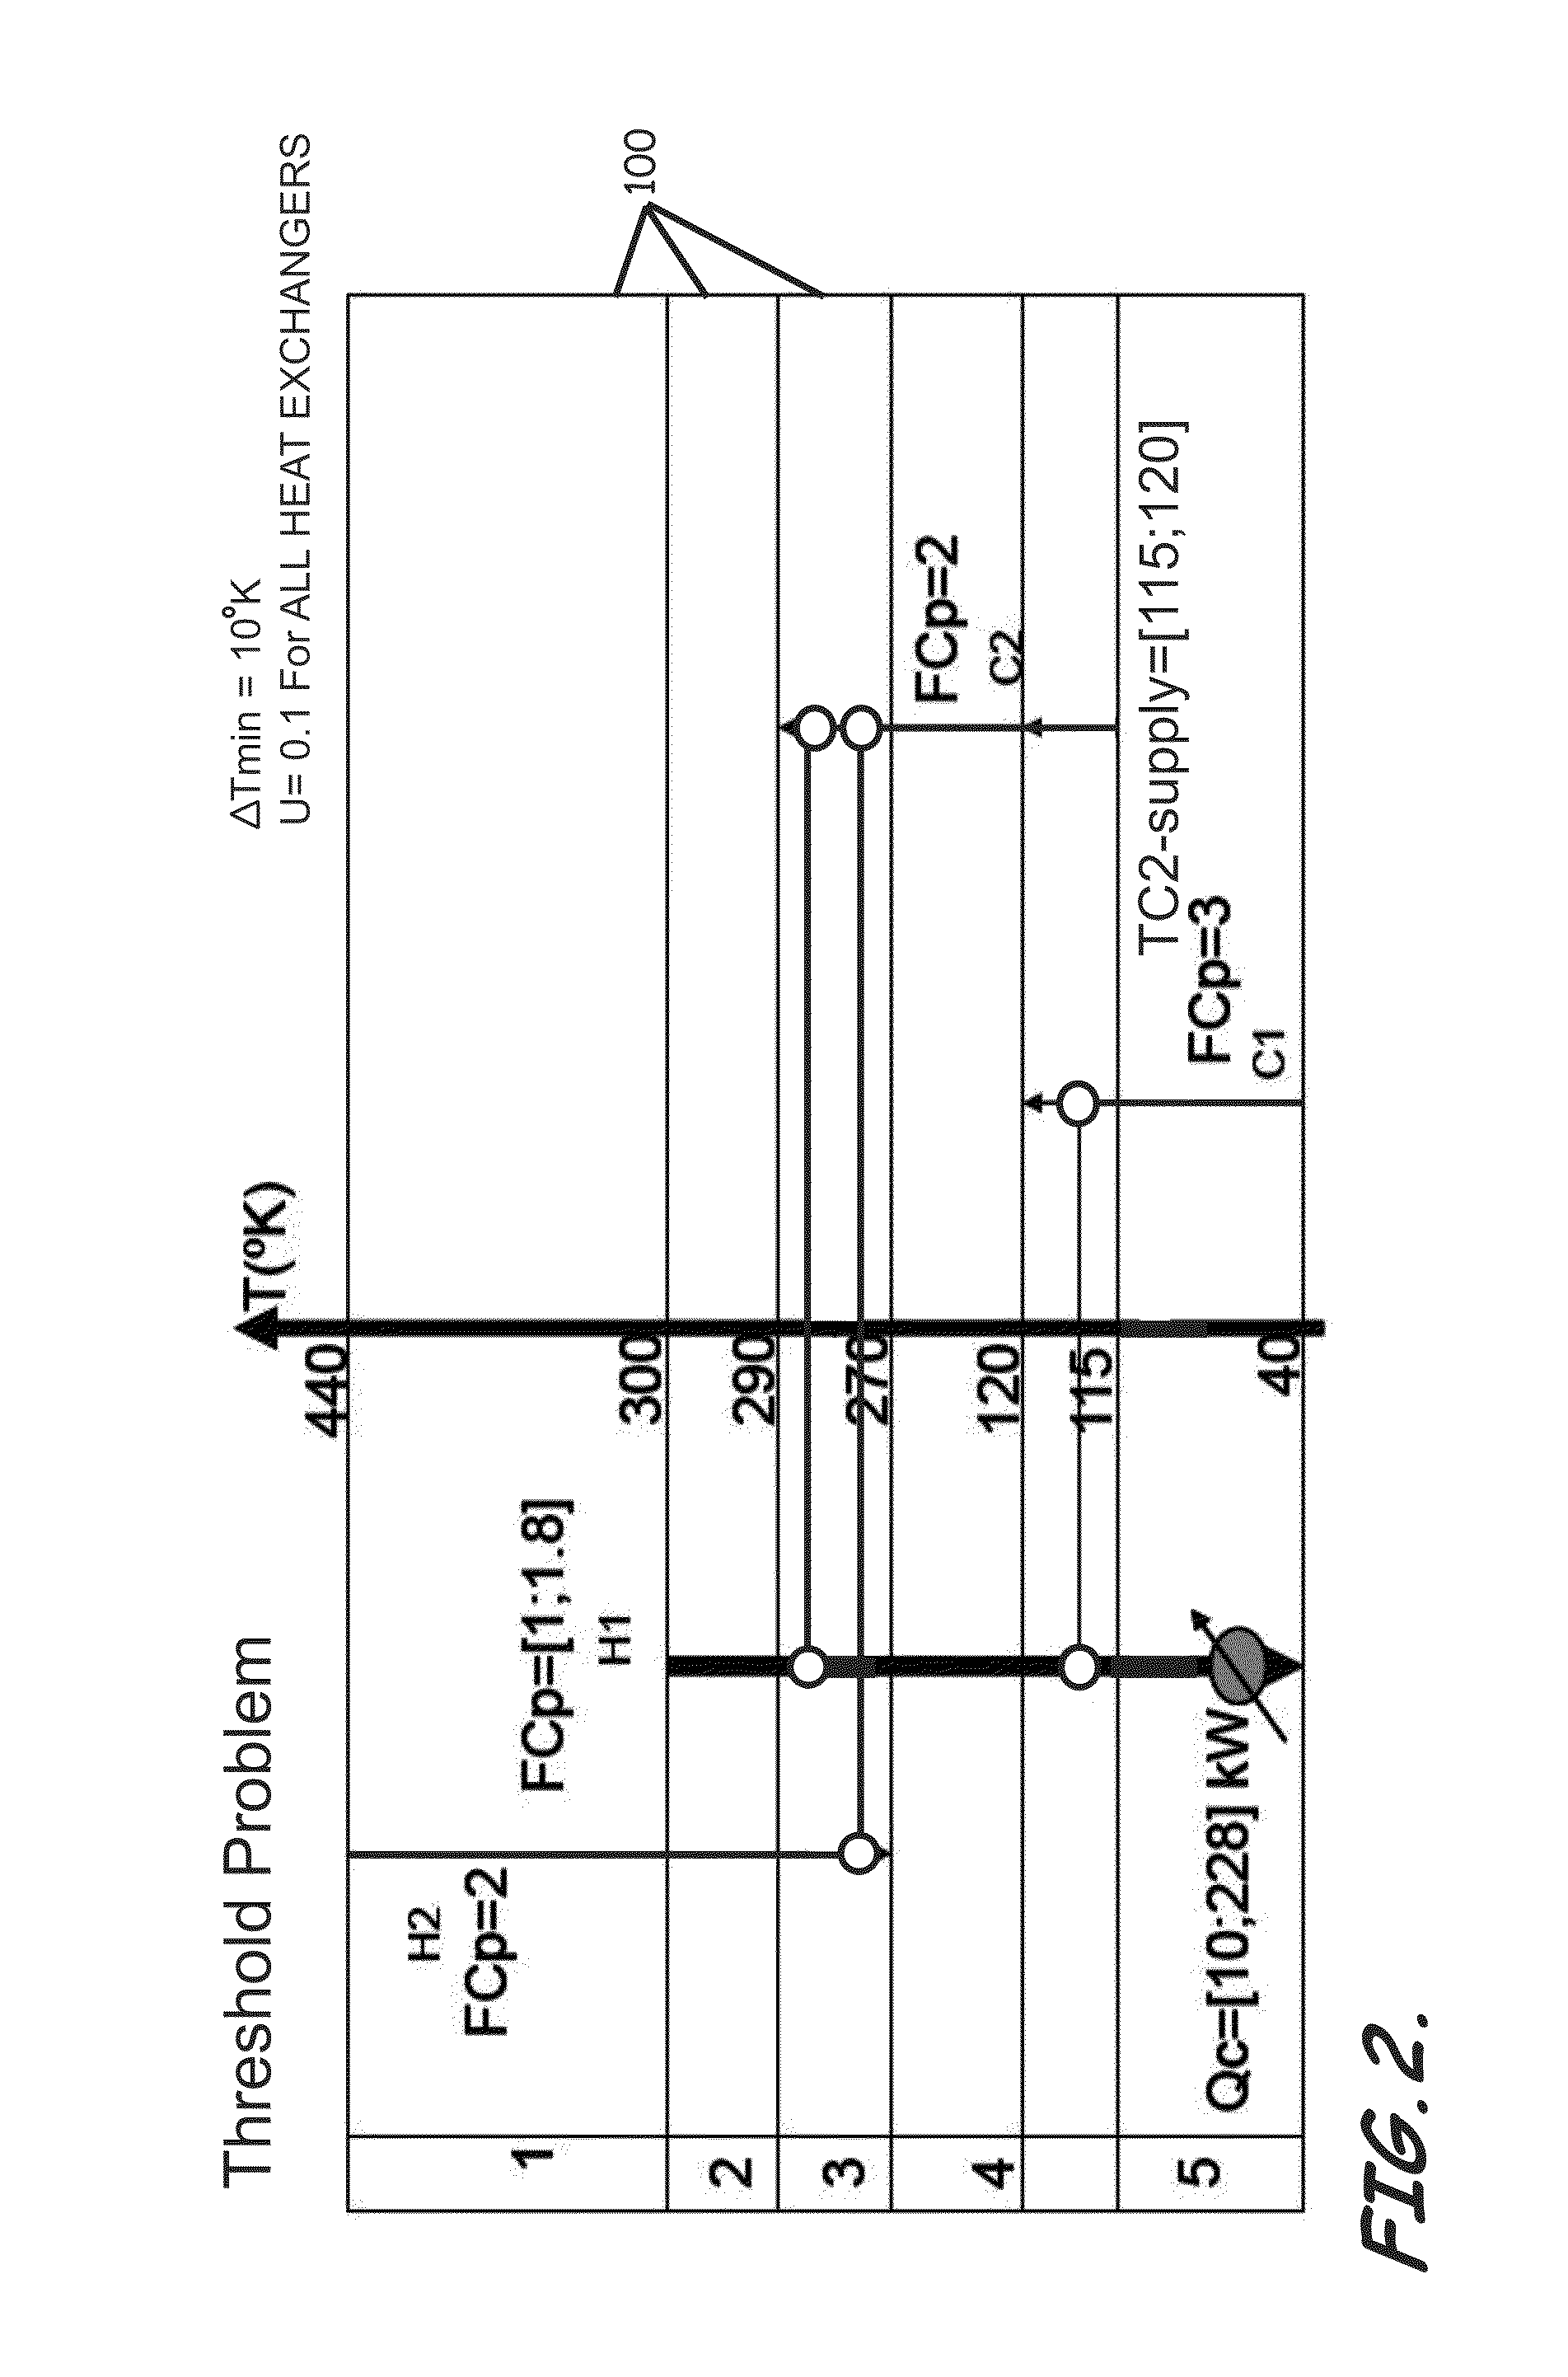 Systems, program product, and methods for targeting optimal process conditions that render an optimal heat exchanger network design under varying conditions